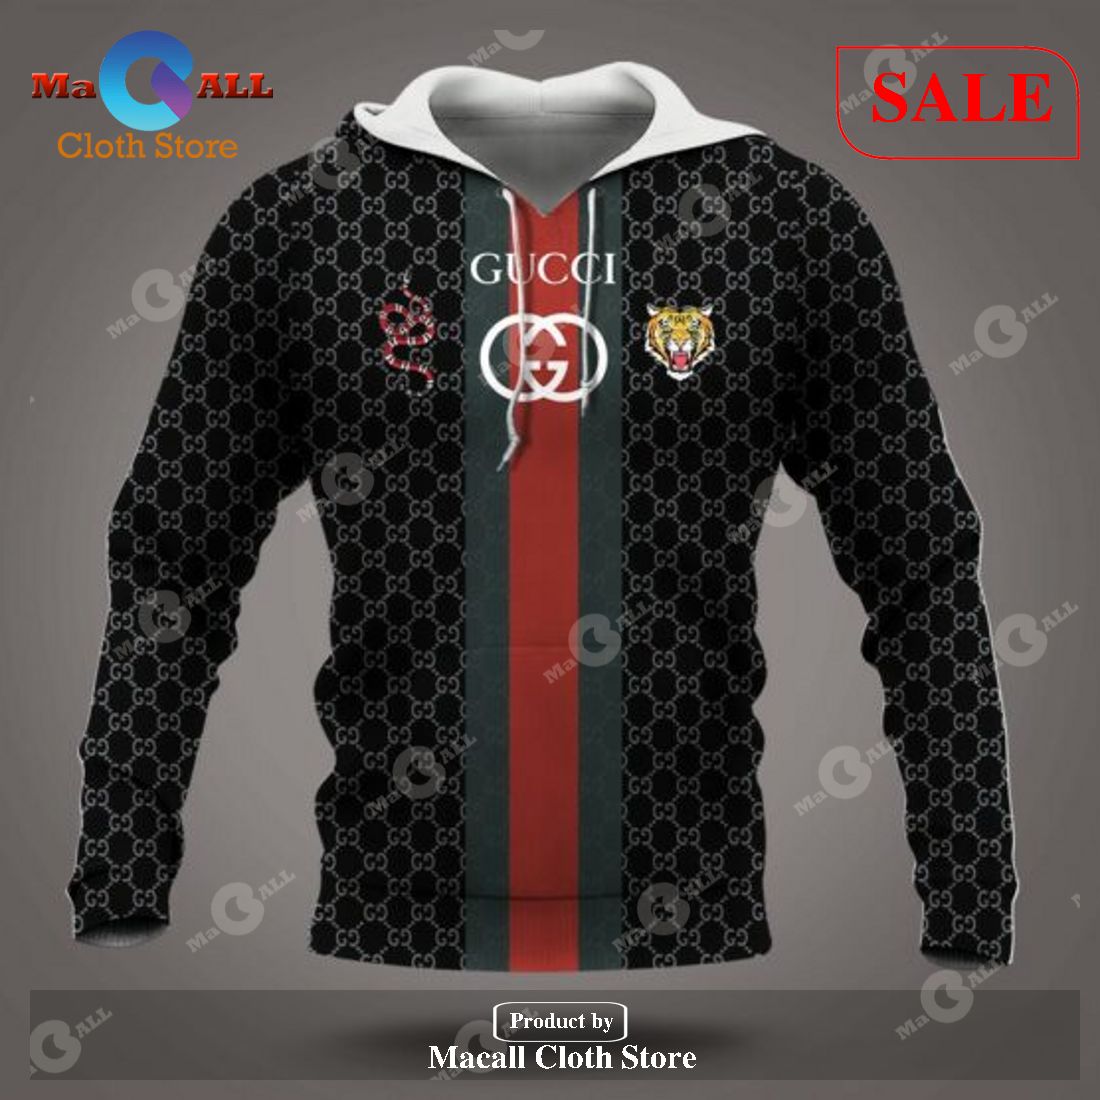 HOT Gucci Luxury Brand Skull 3D Design Bomber Jacket Limited Edition